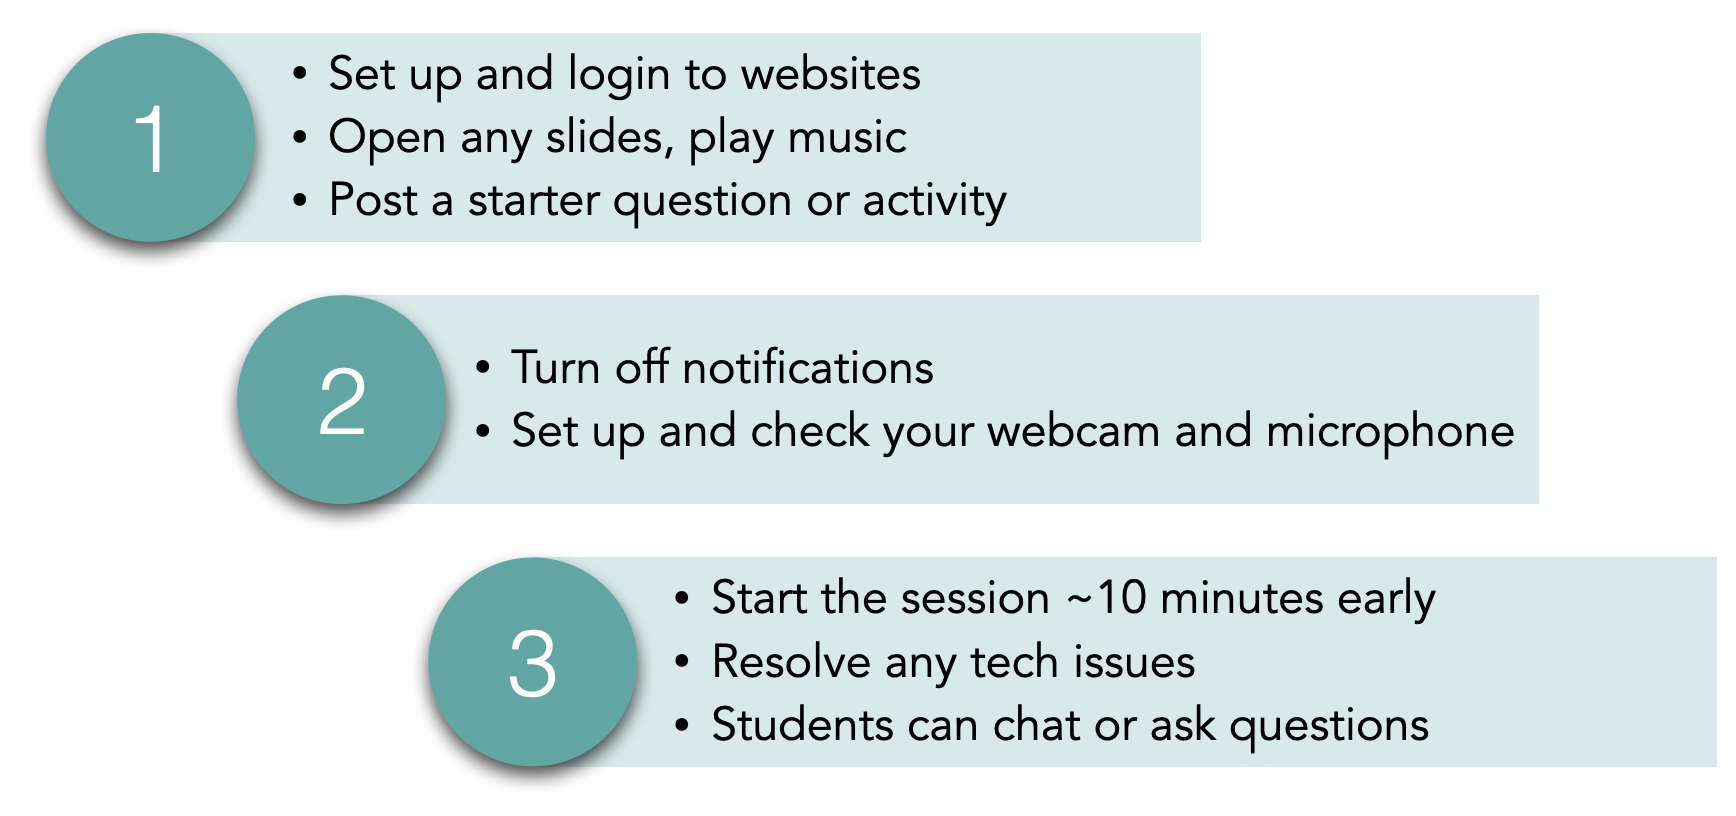 (1) Set up and login to websites Open any slides, play music. (2) Turn off notifications Set up and check your webcam and microphone (3) Start the session ~10 minutes early Resolve any tech issues Students can chat or ask questions